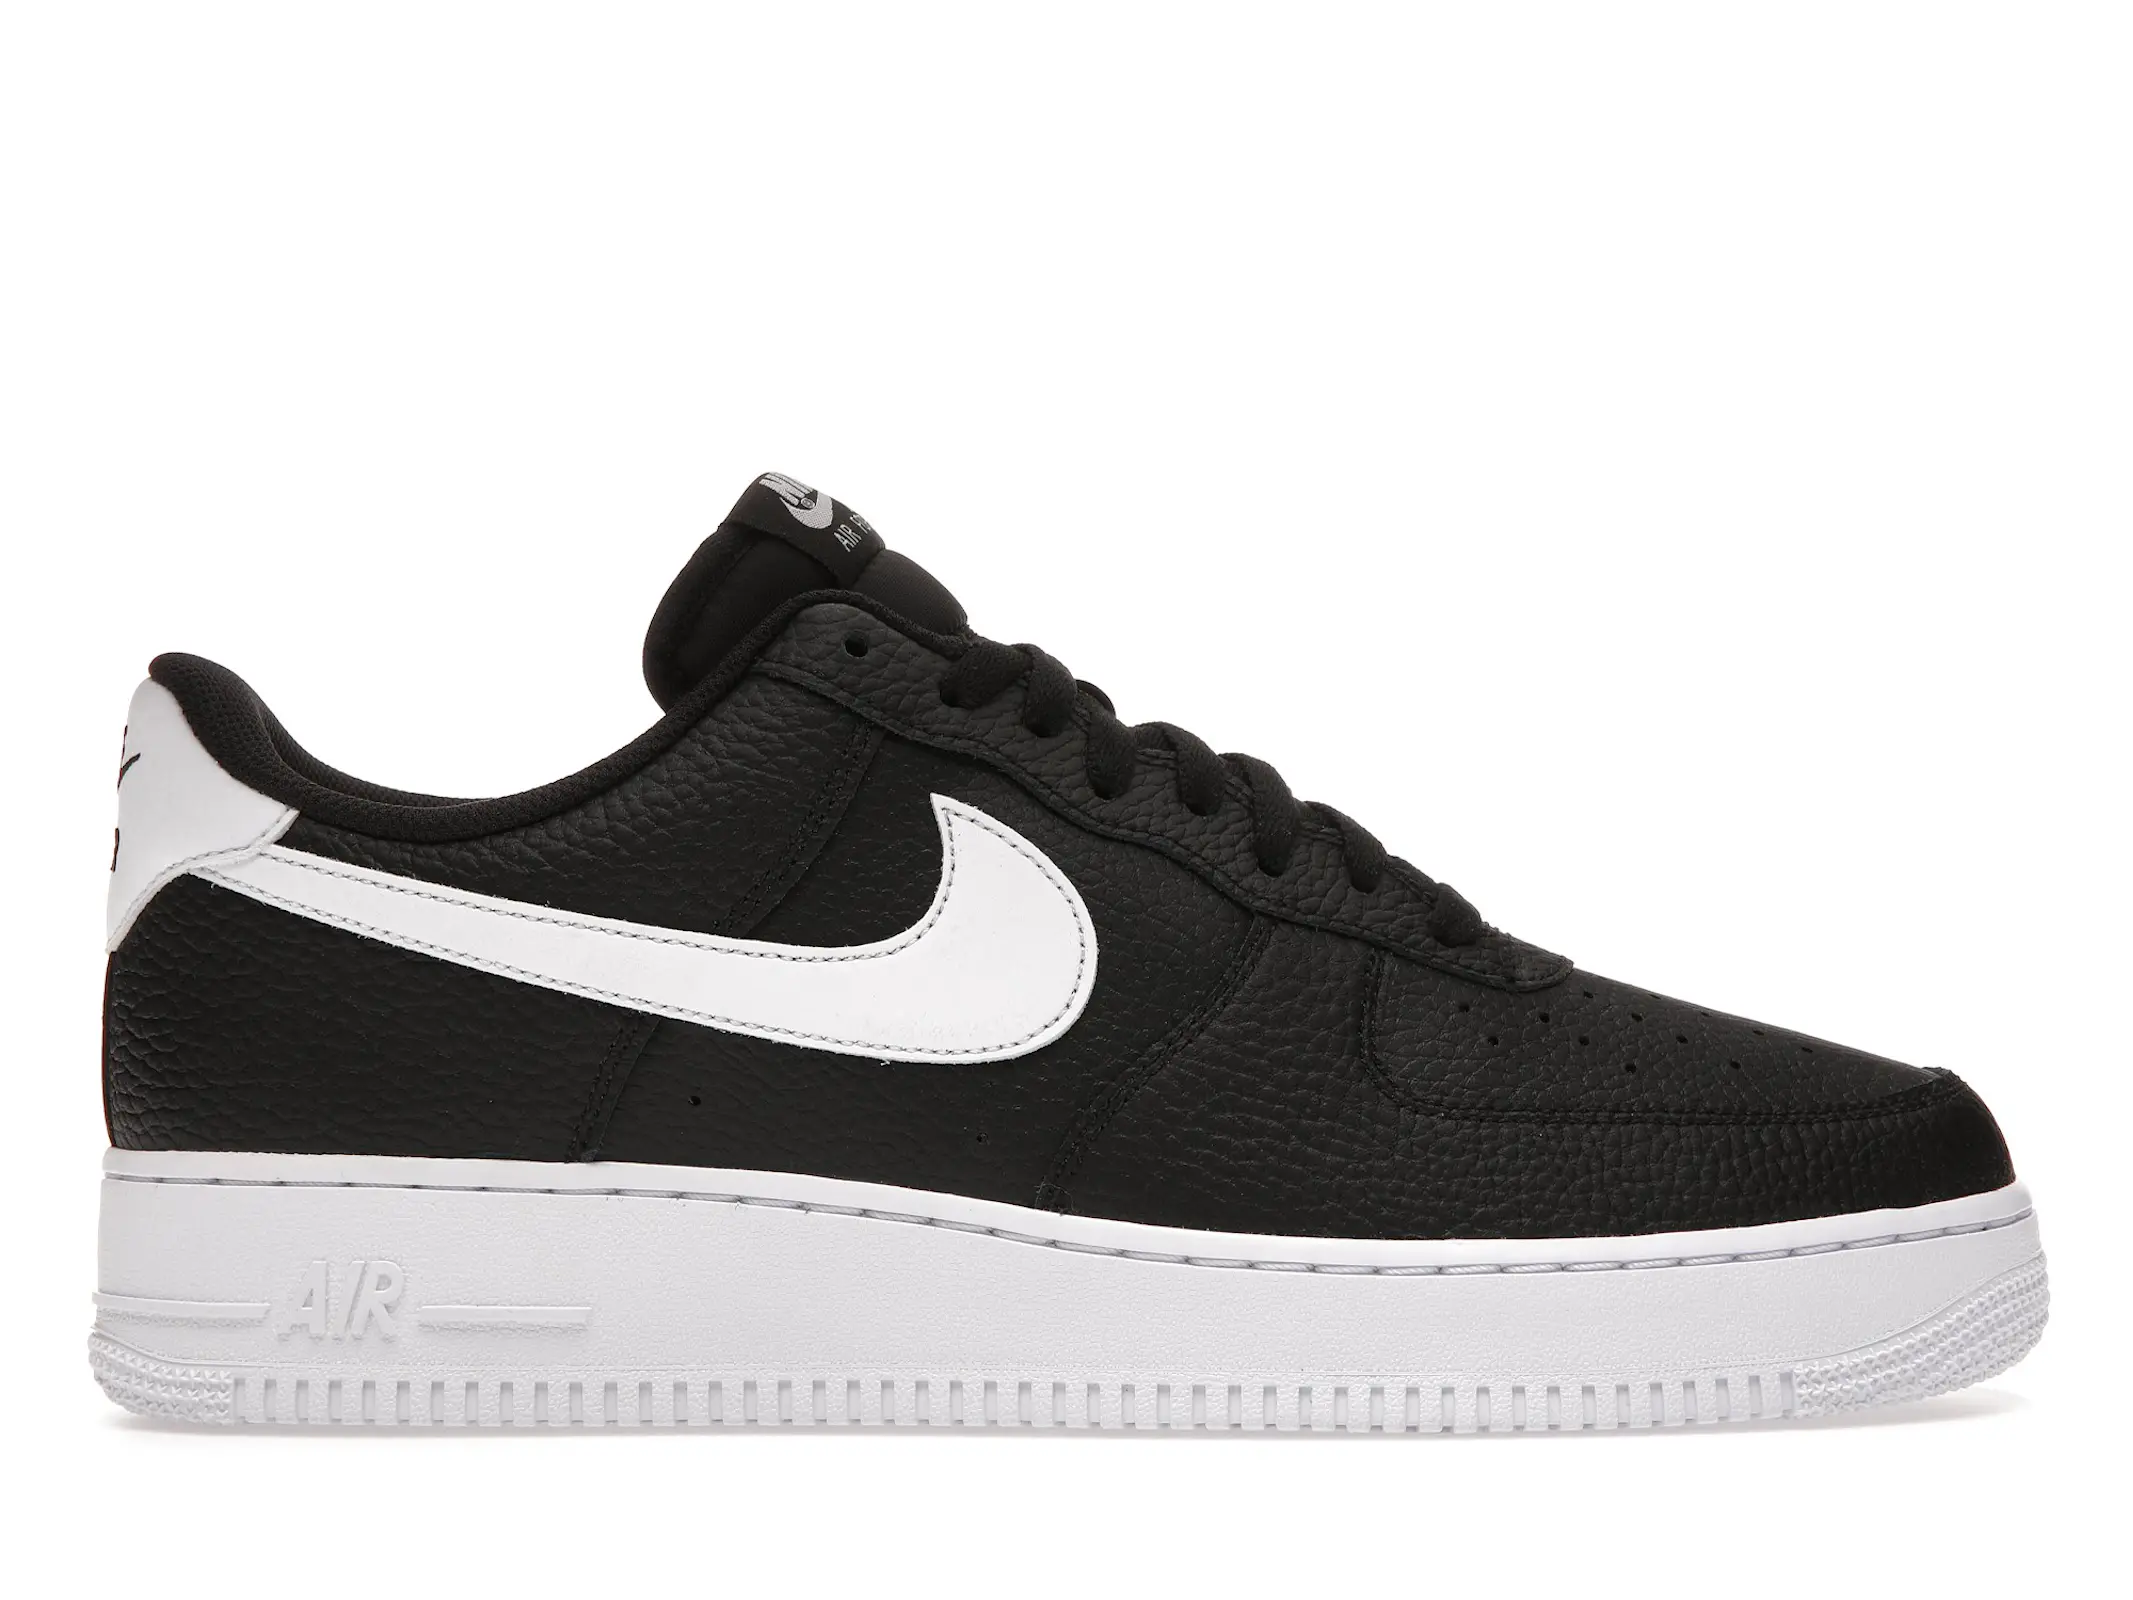 Nike Air Force 1 Low '07 Black White Pebbled Leather - CT2302-002